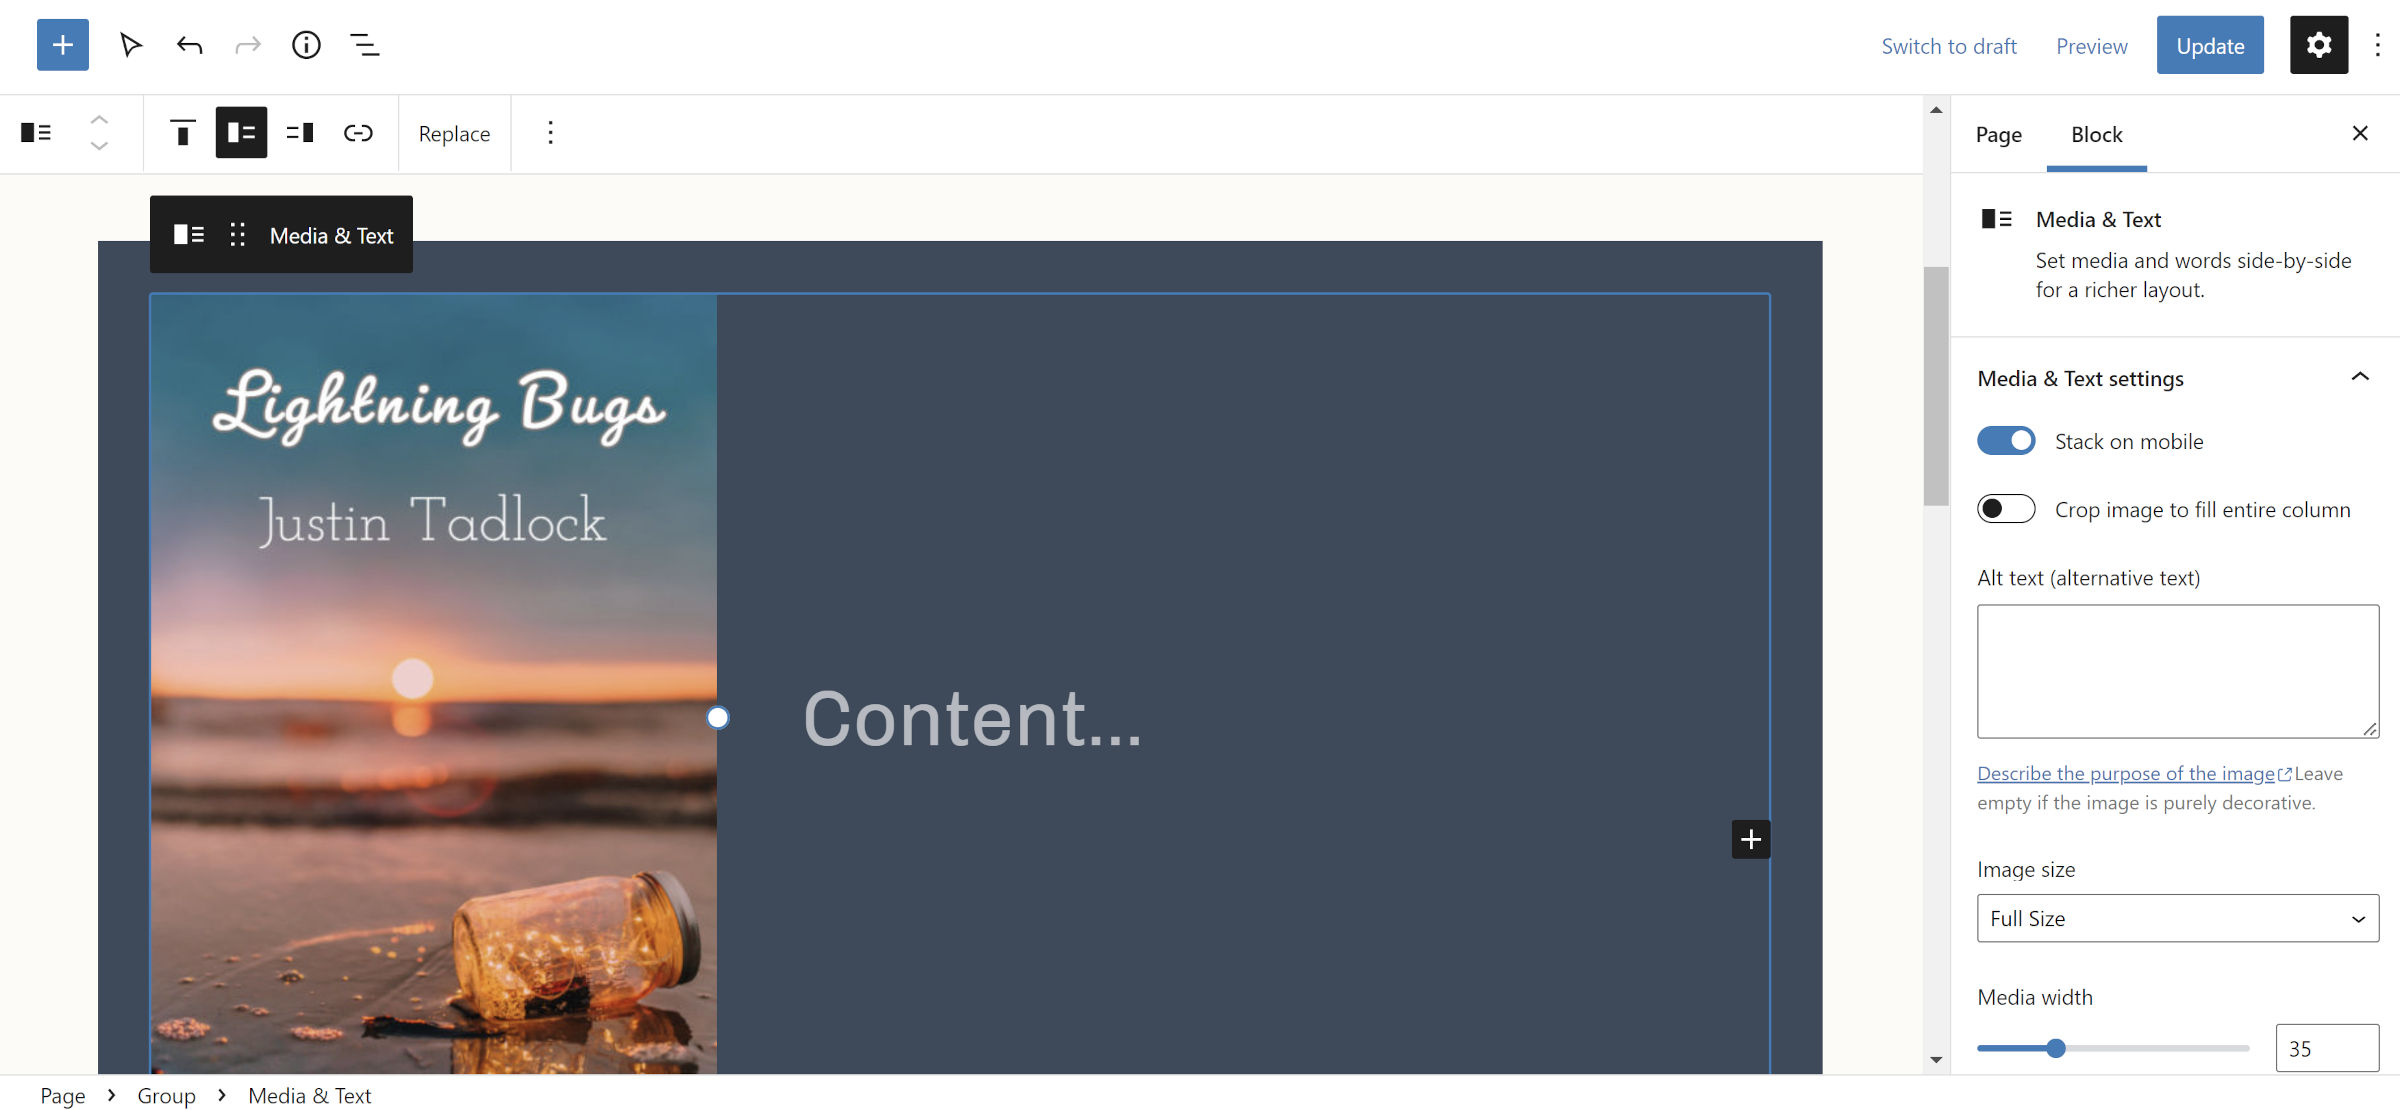 WordPress post editor with a Media & Text block.  It shows a book cover image on the left.